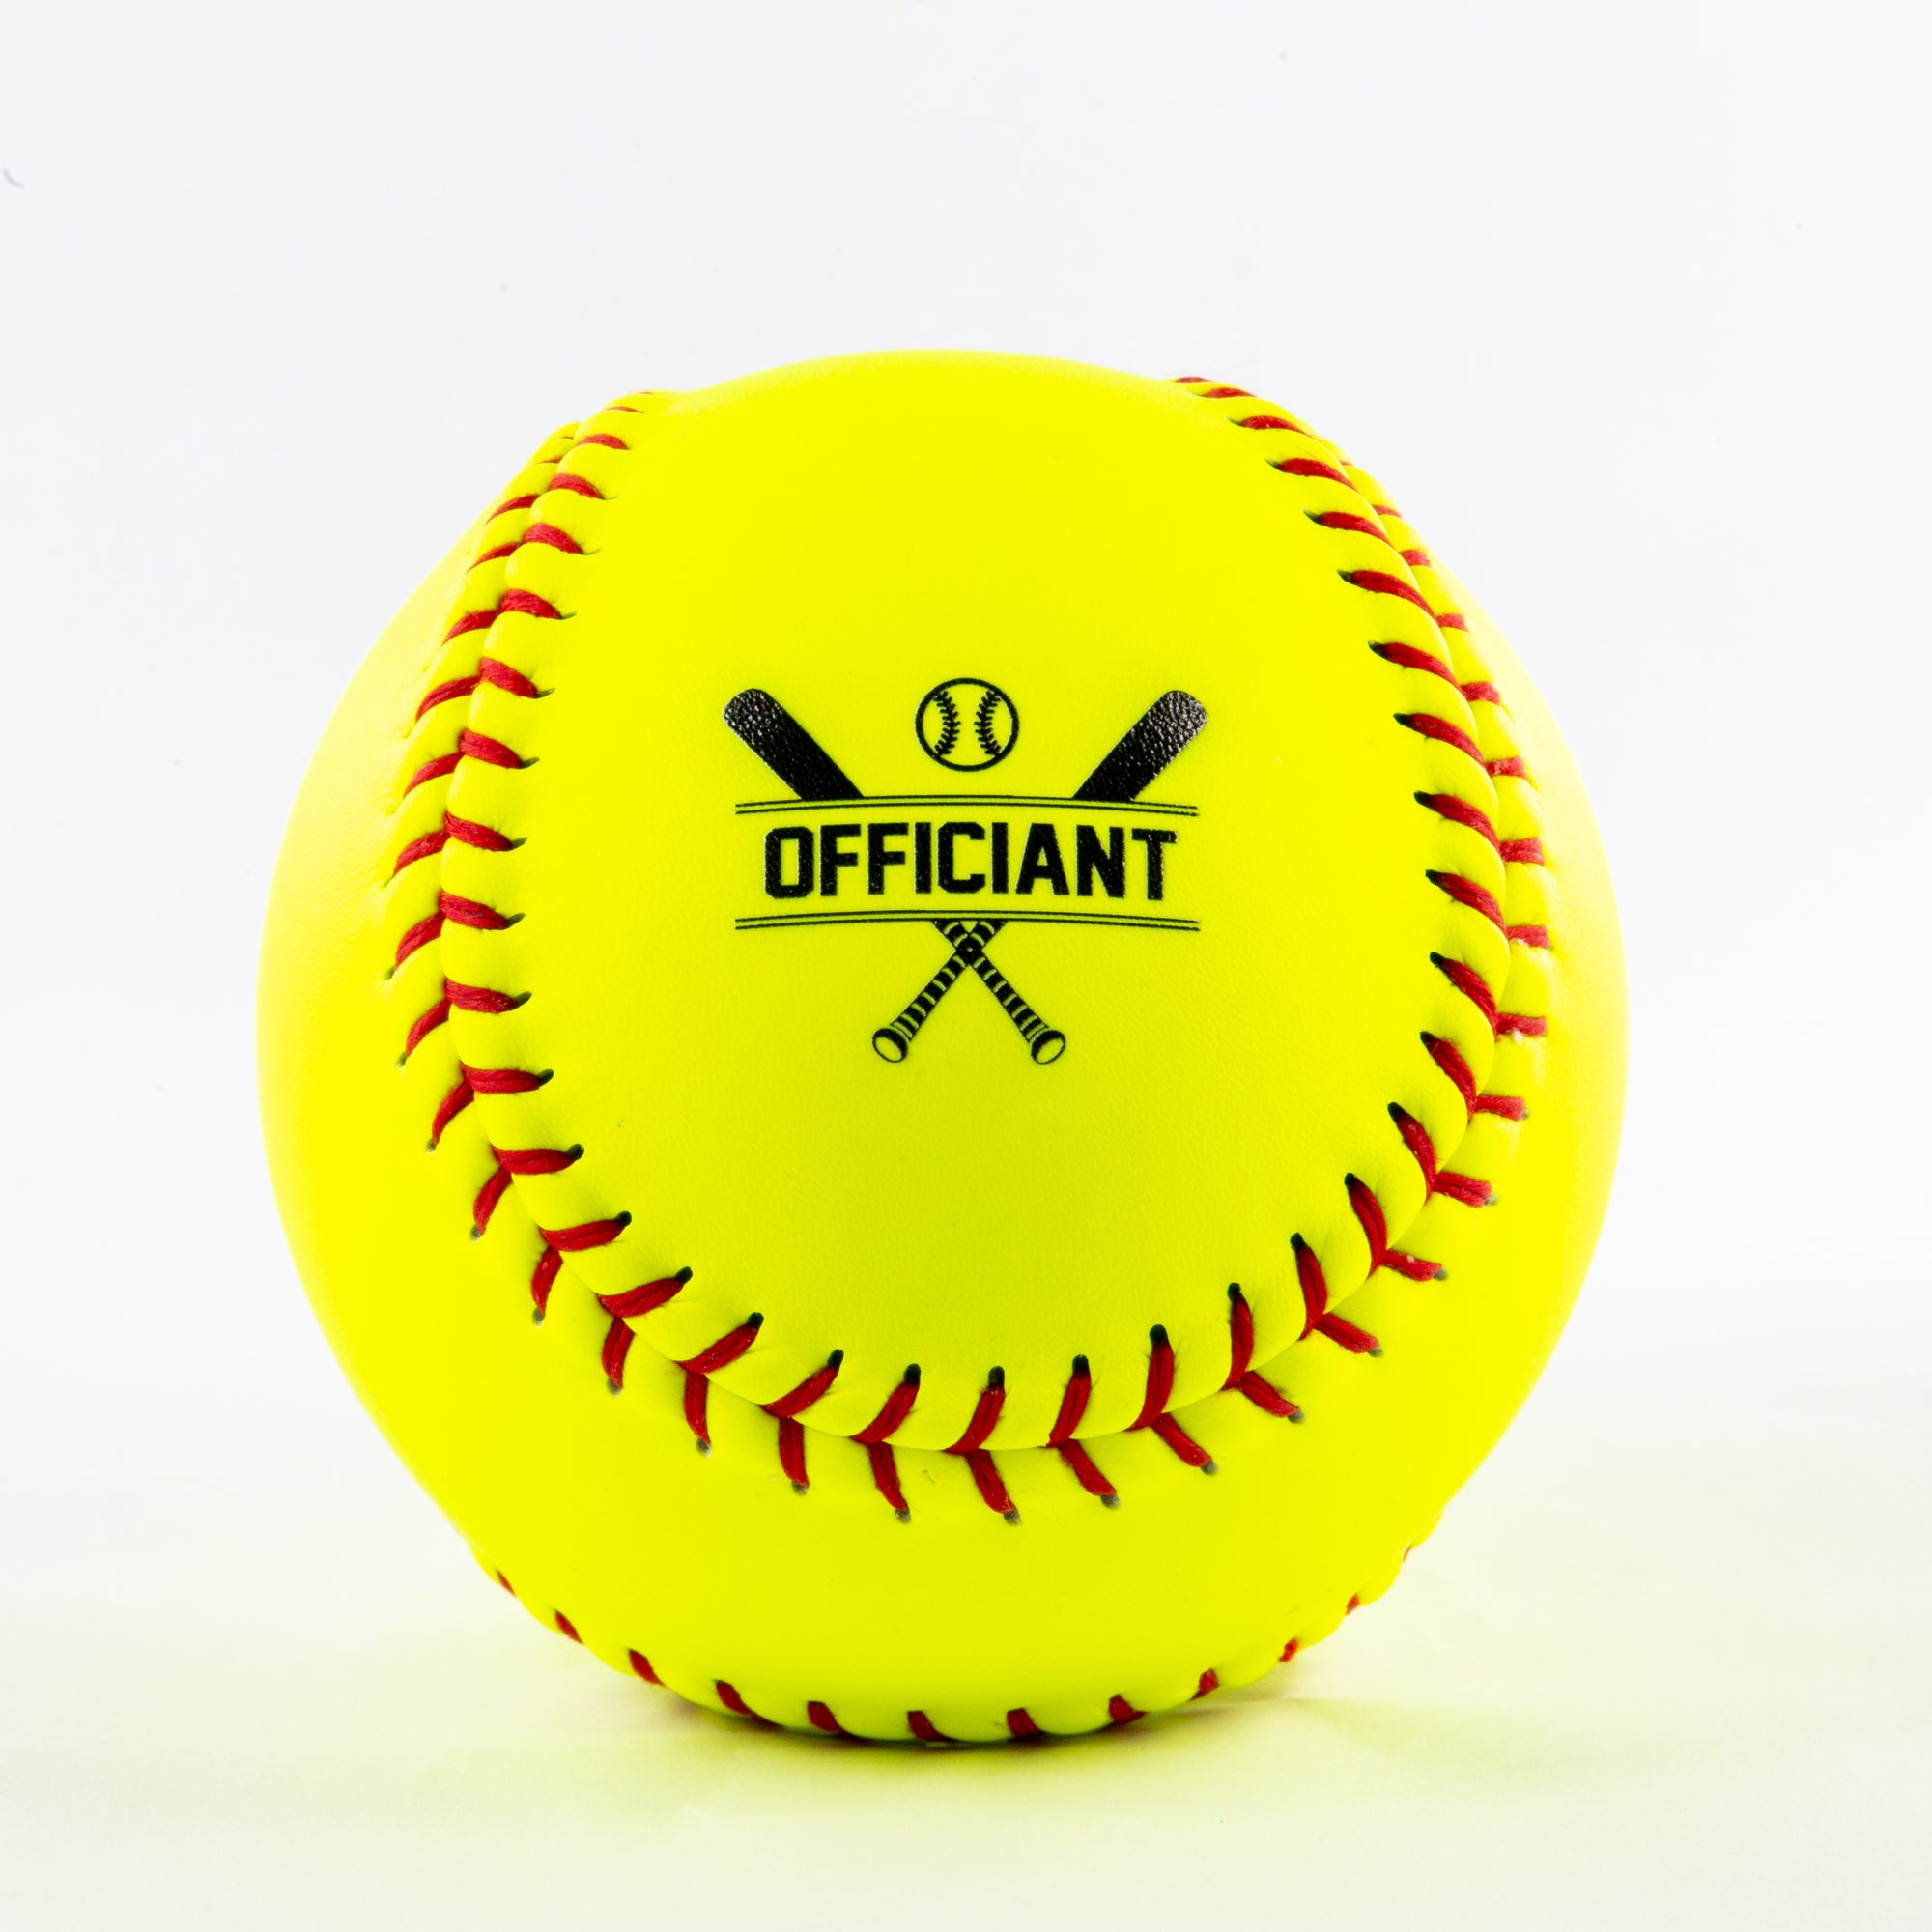 Printed Softball with Officiant Design